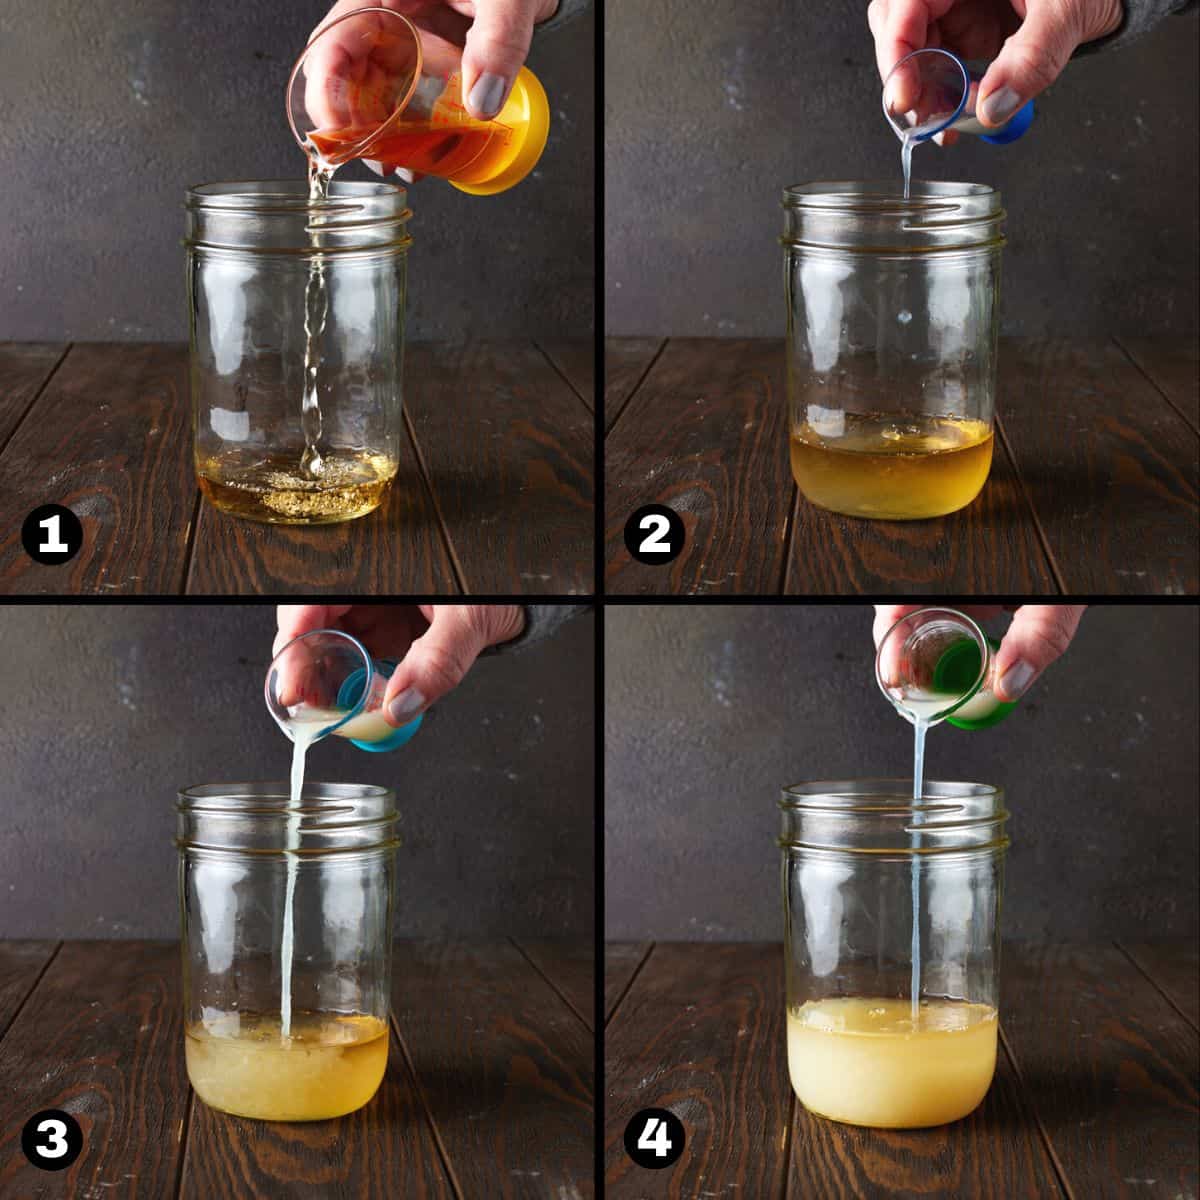 Steps 1-4 for making a tequila sour.